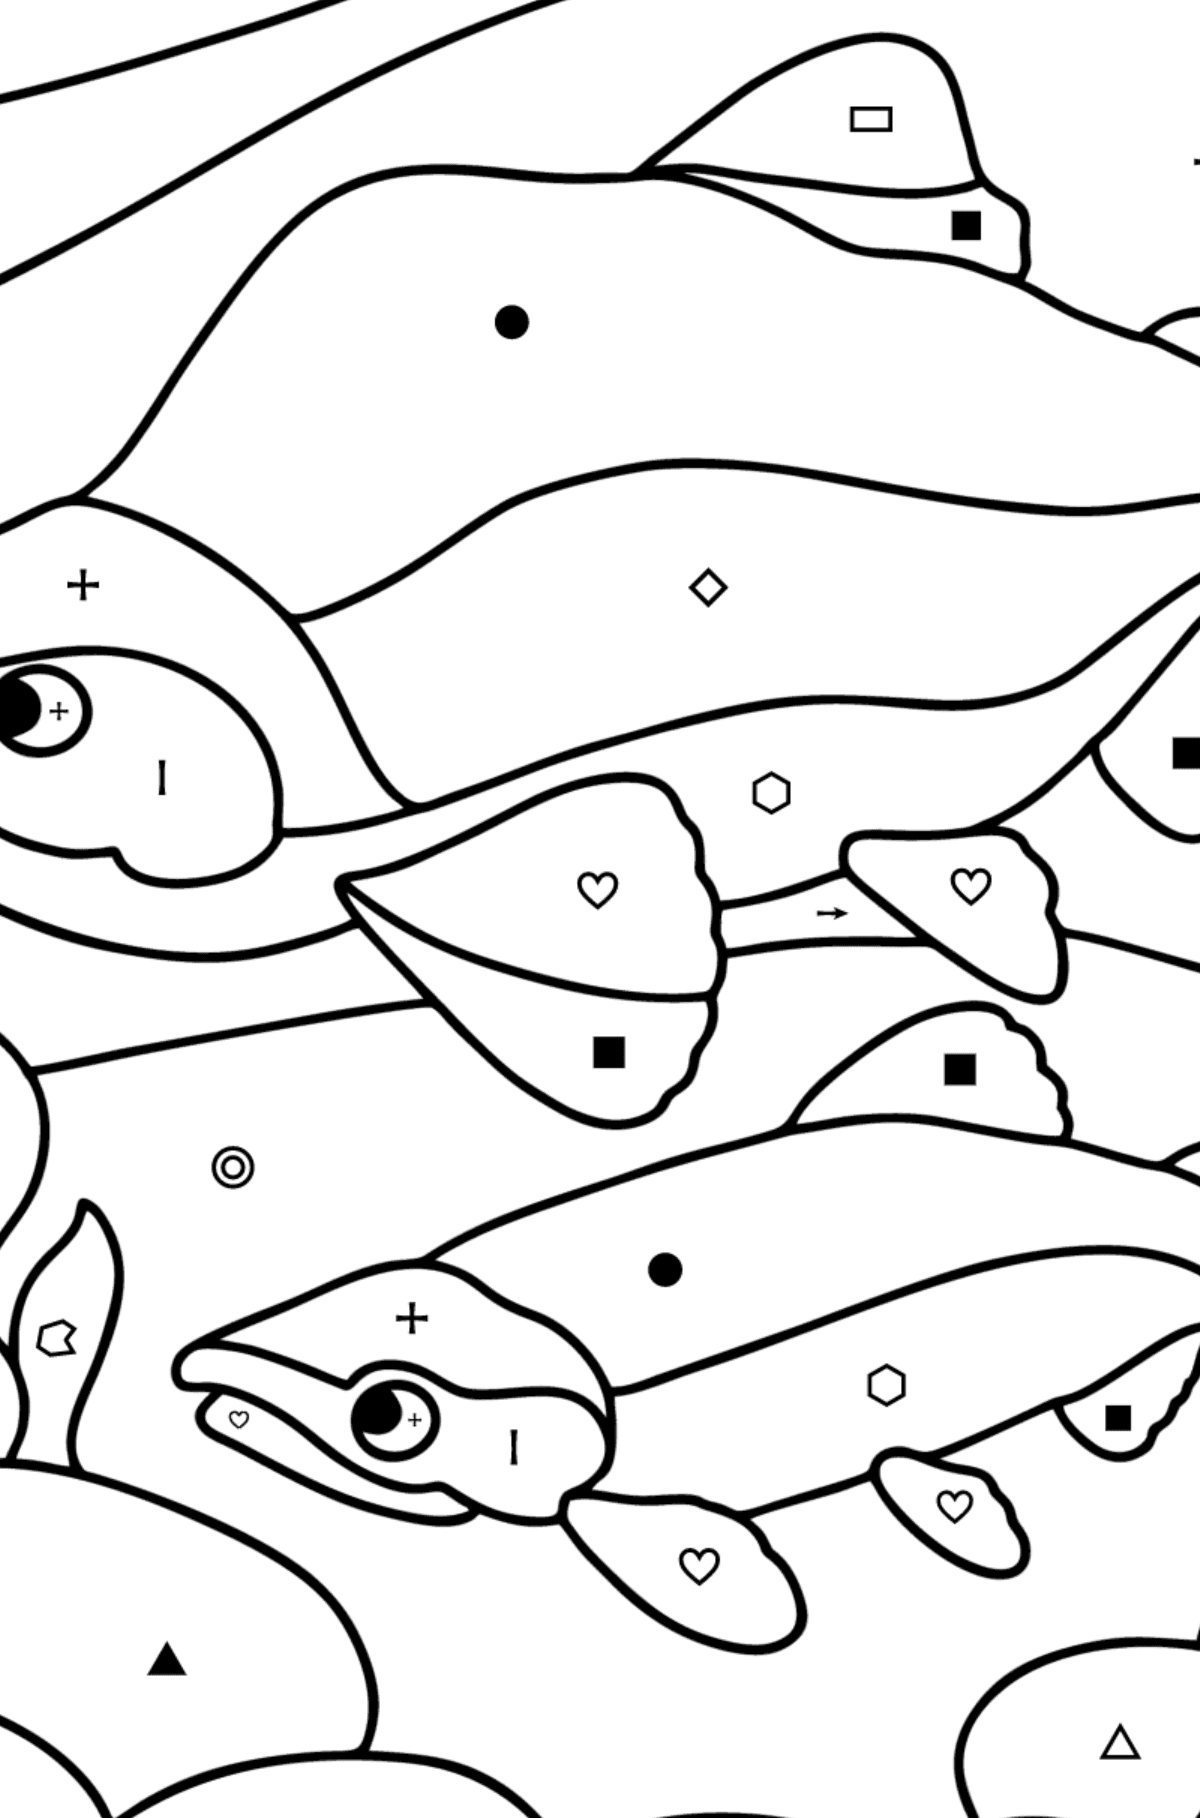 Red salmon coloring page - Coloring by Symbols and Geometric Shapes for Kids